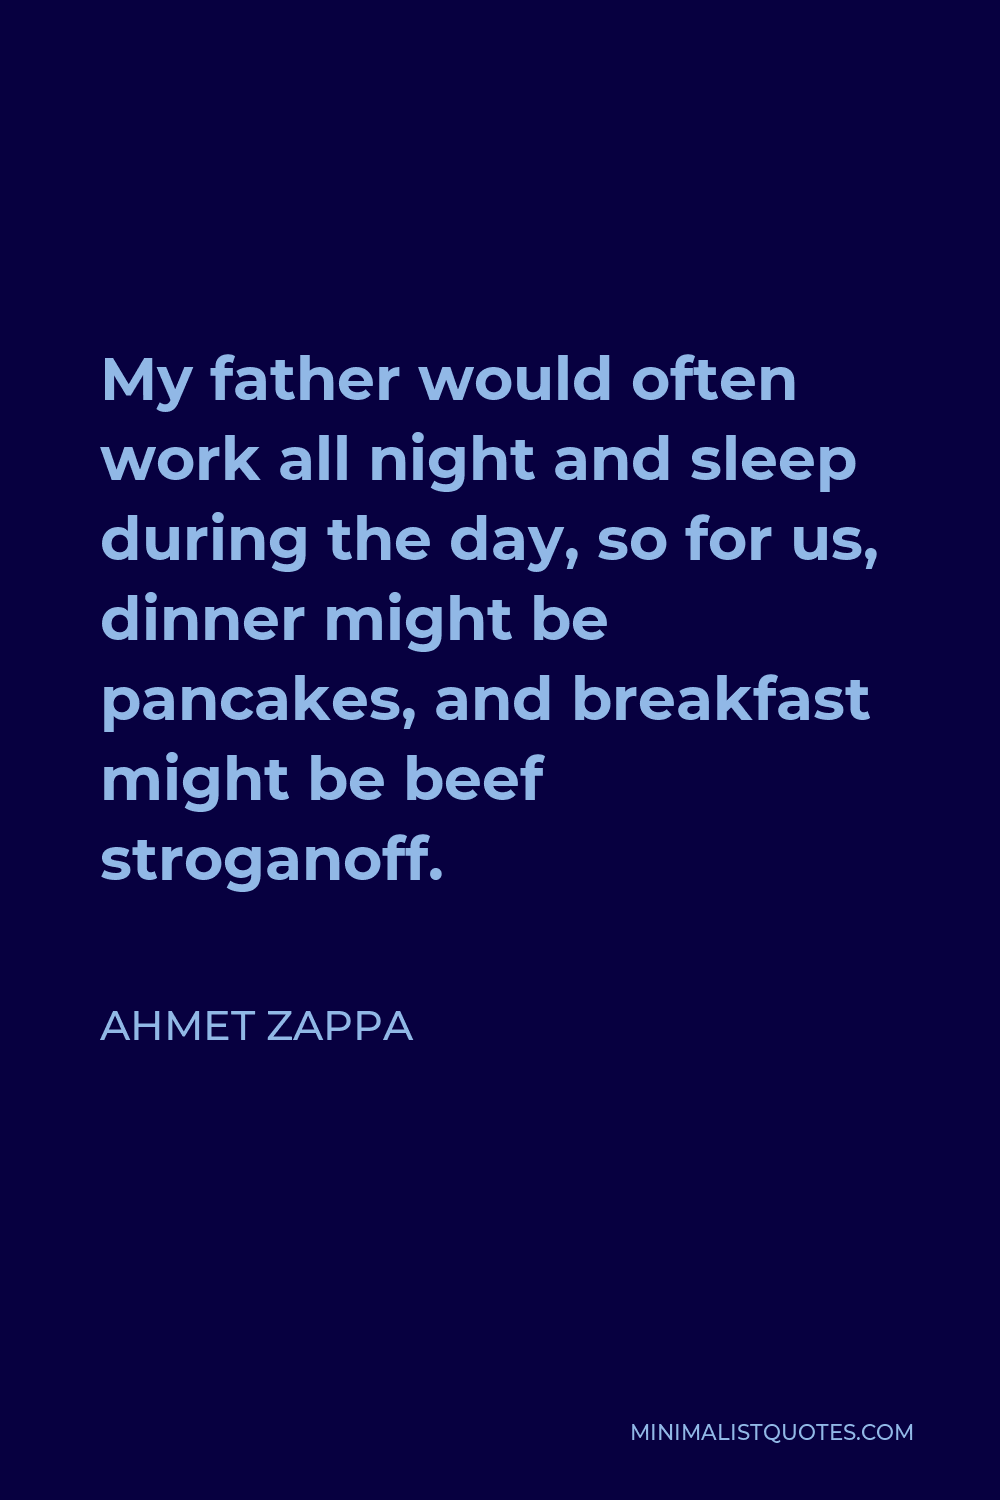 Ahmet Zappa Quote - My father would often work all night and sleep during the day, so for us, dinner might be pancakes, and breakfast might be beef stroganoff.